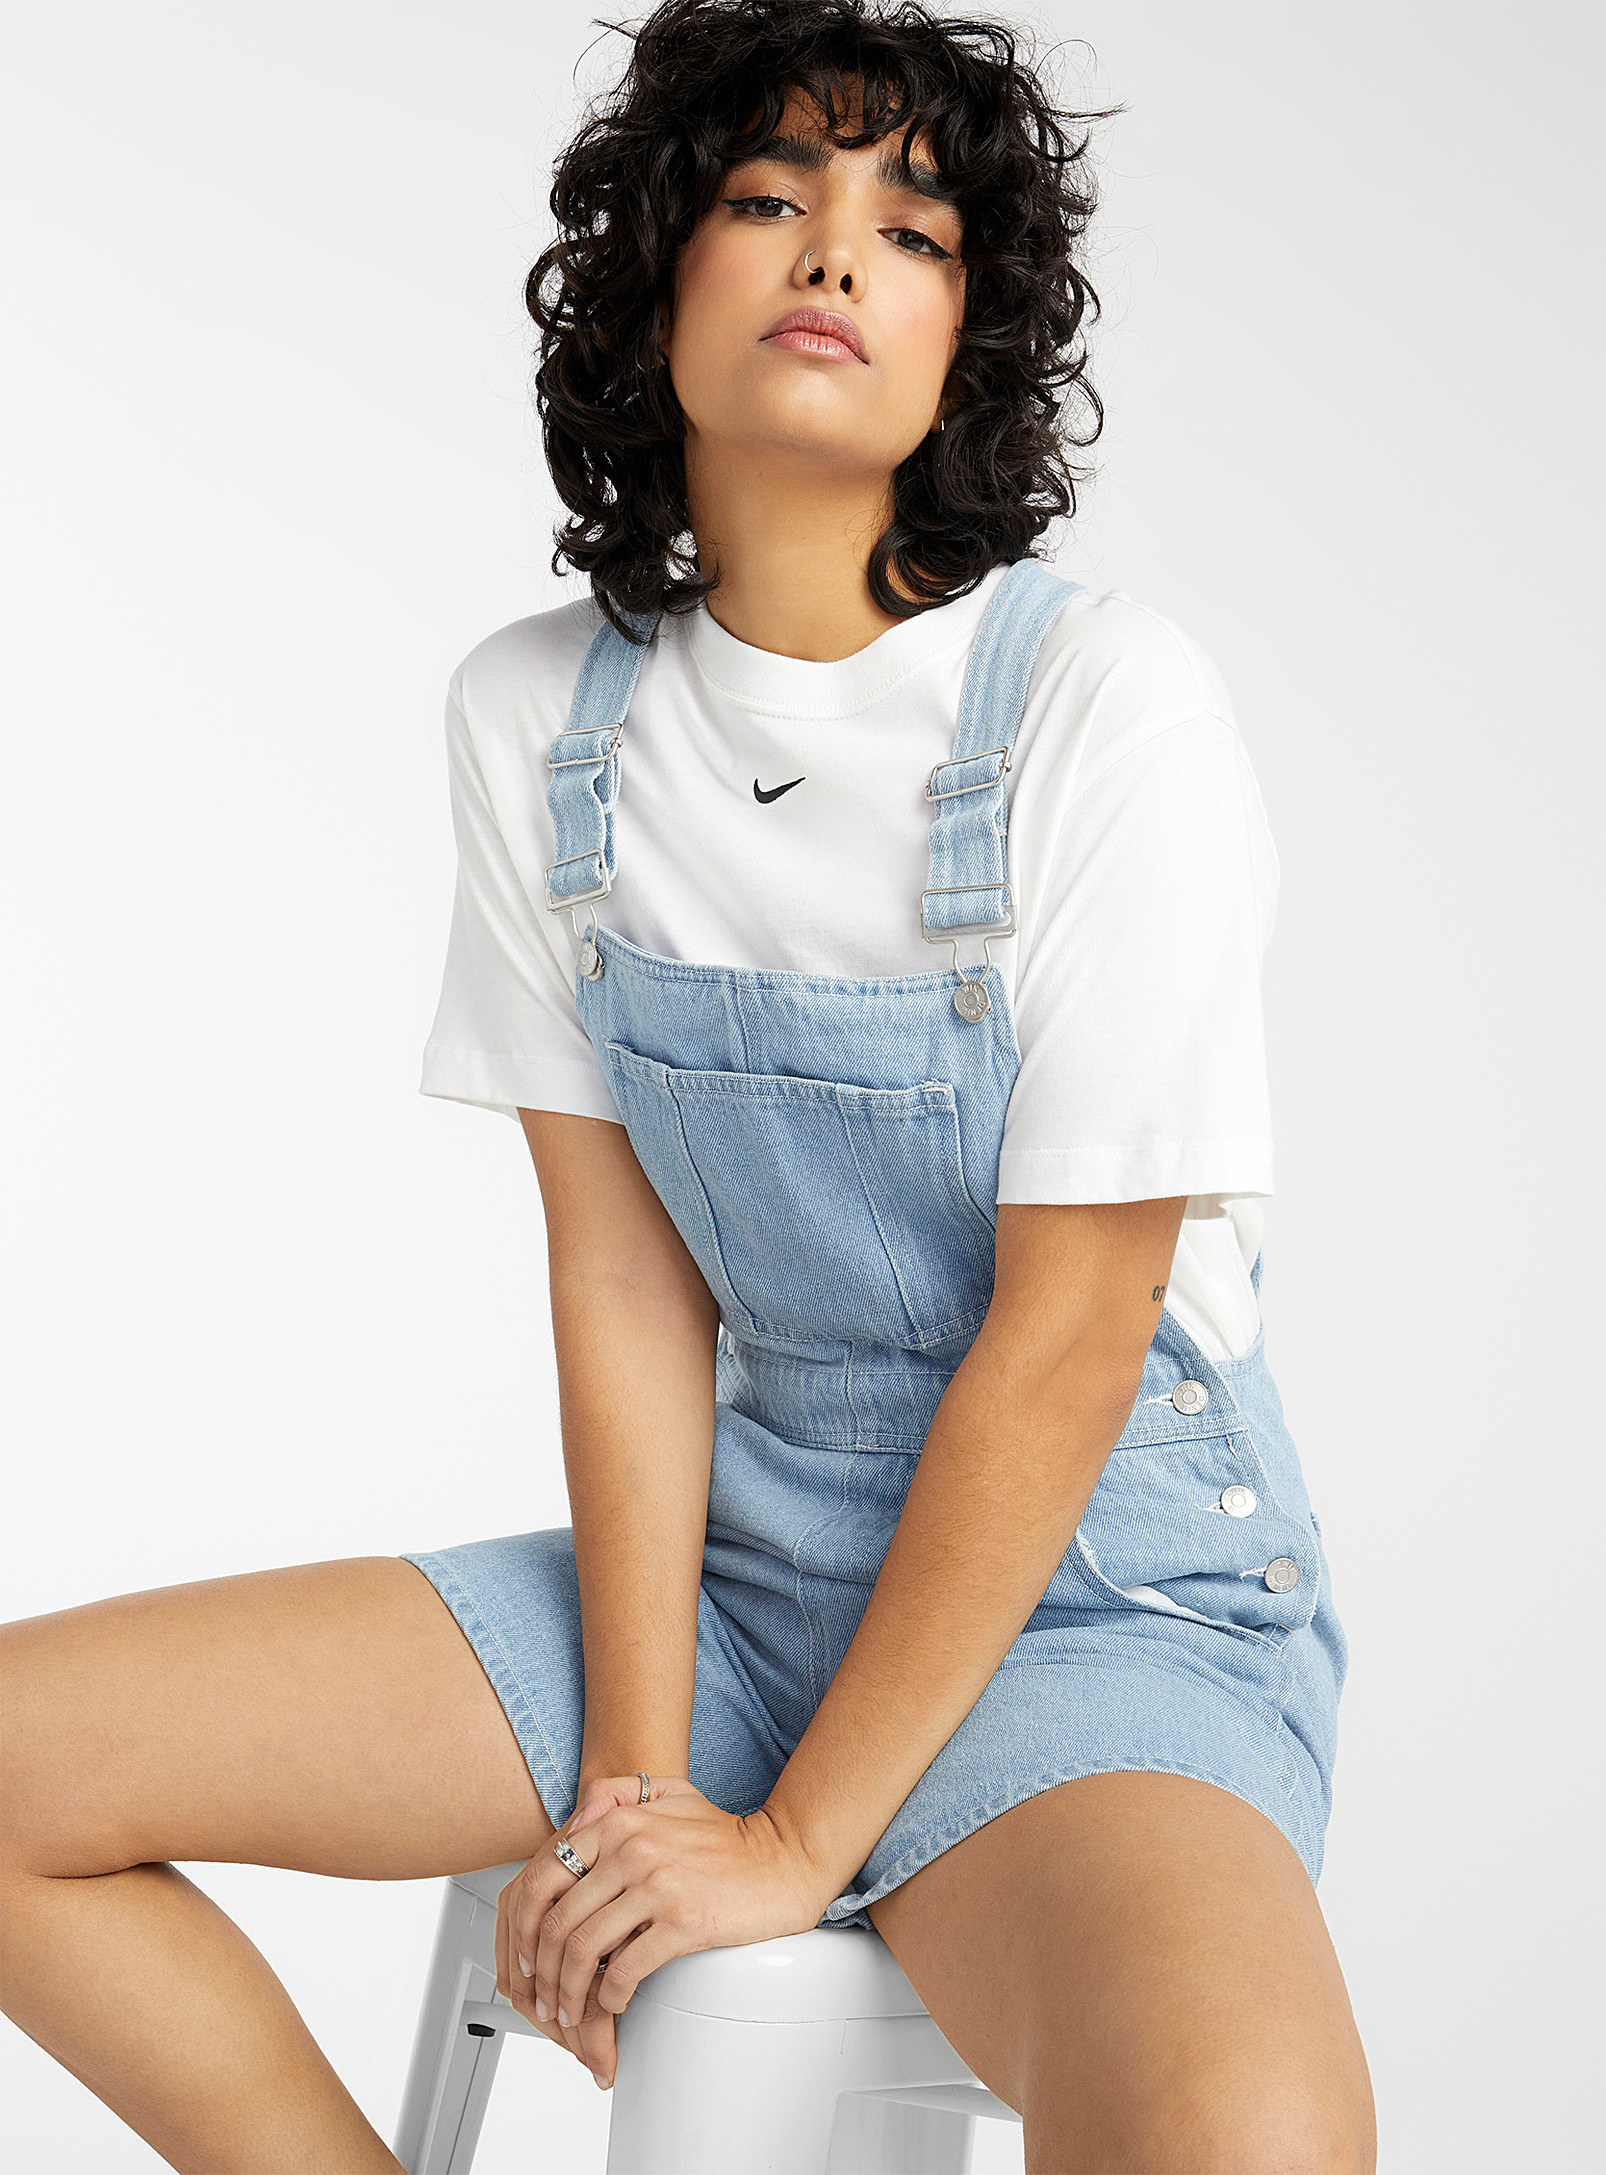 A person wearing a pair of overalls with a T-shirt